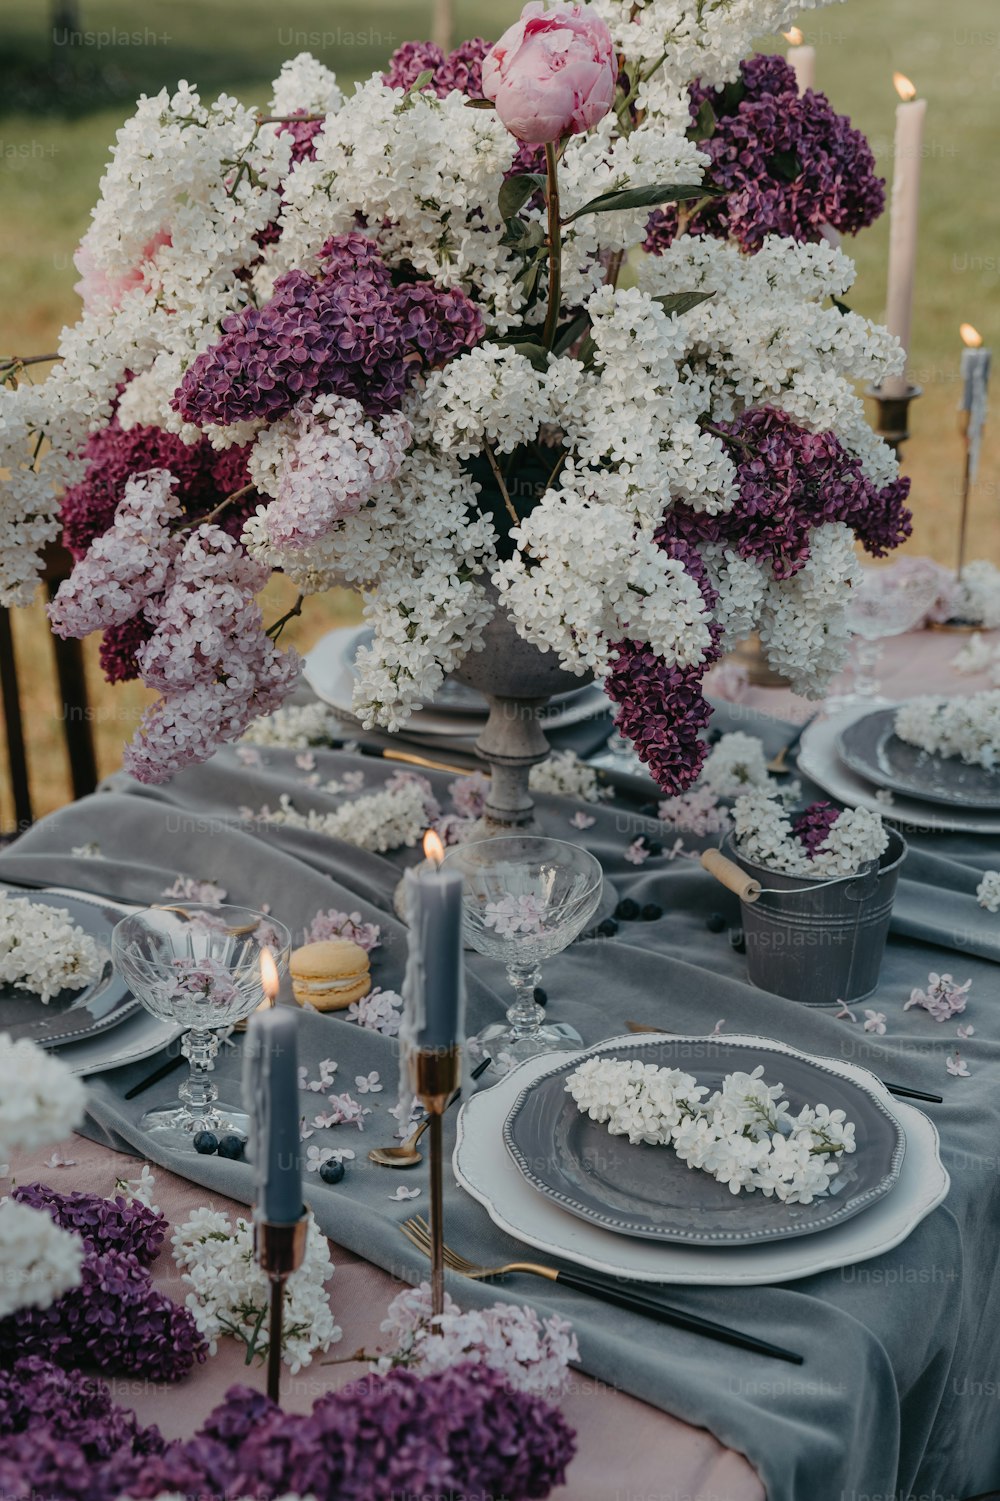 a table set with plates and flowers on it